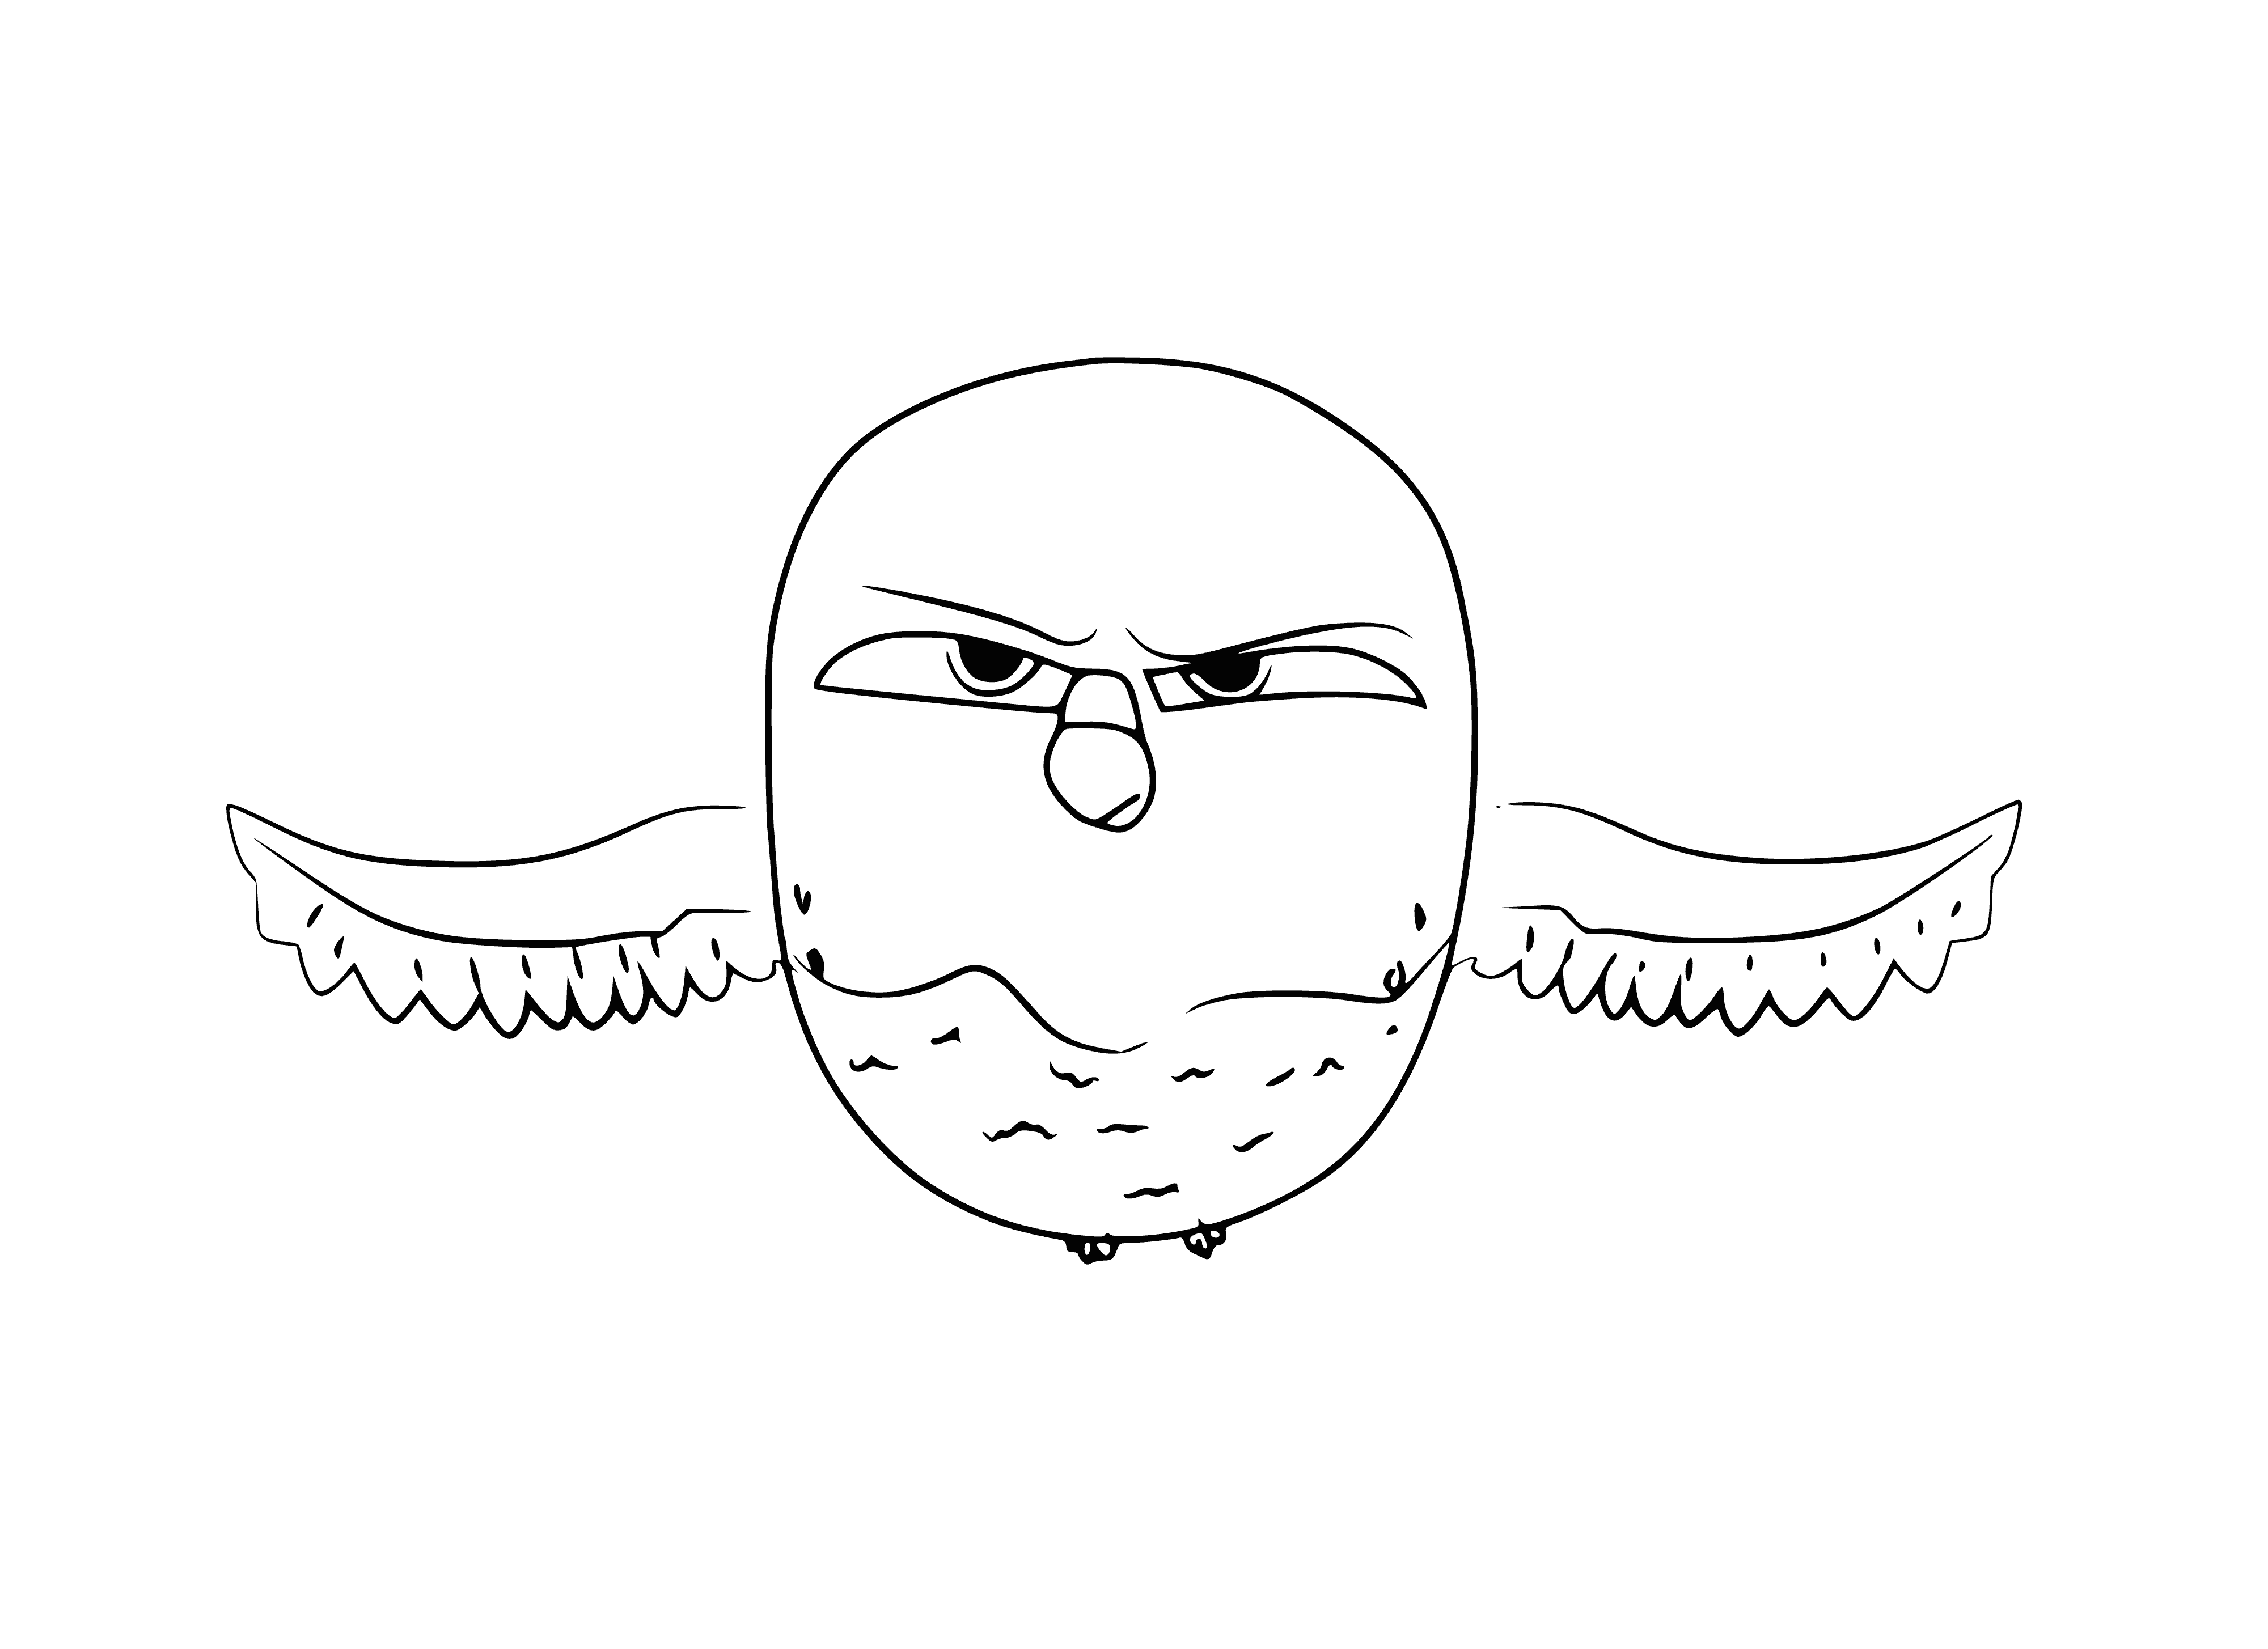 Parrot Pea coloring page